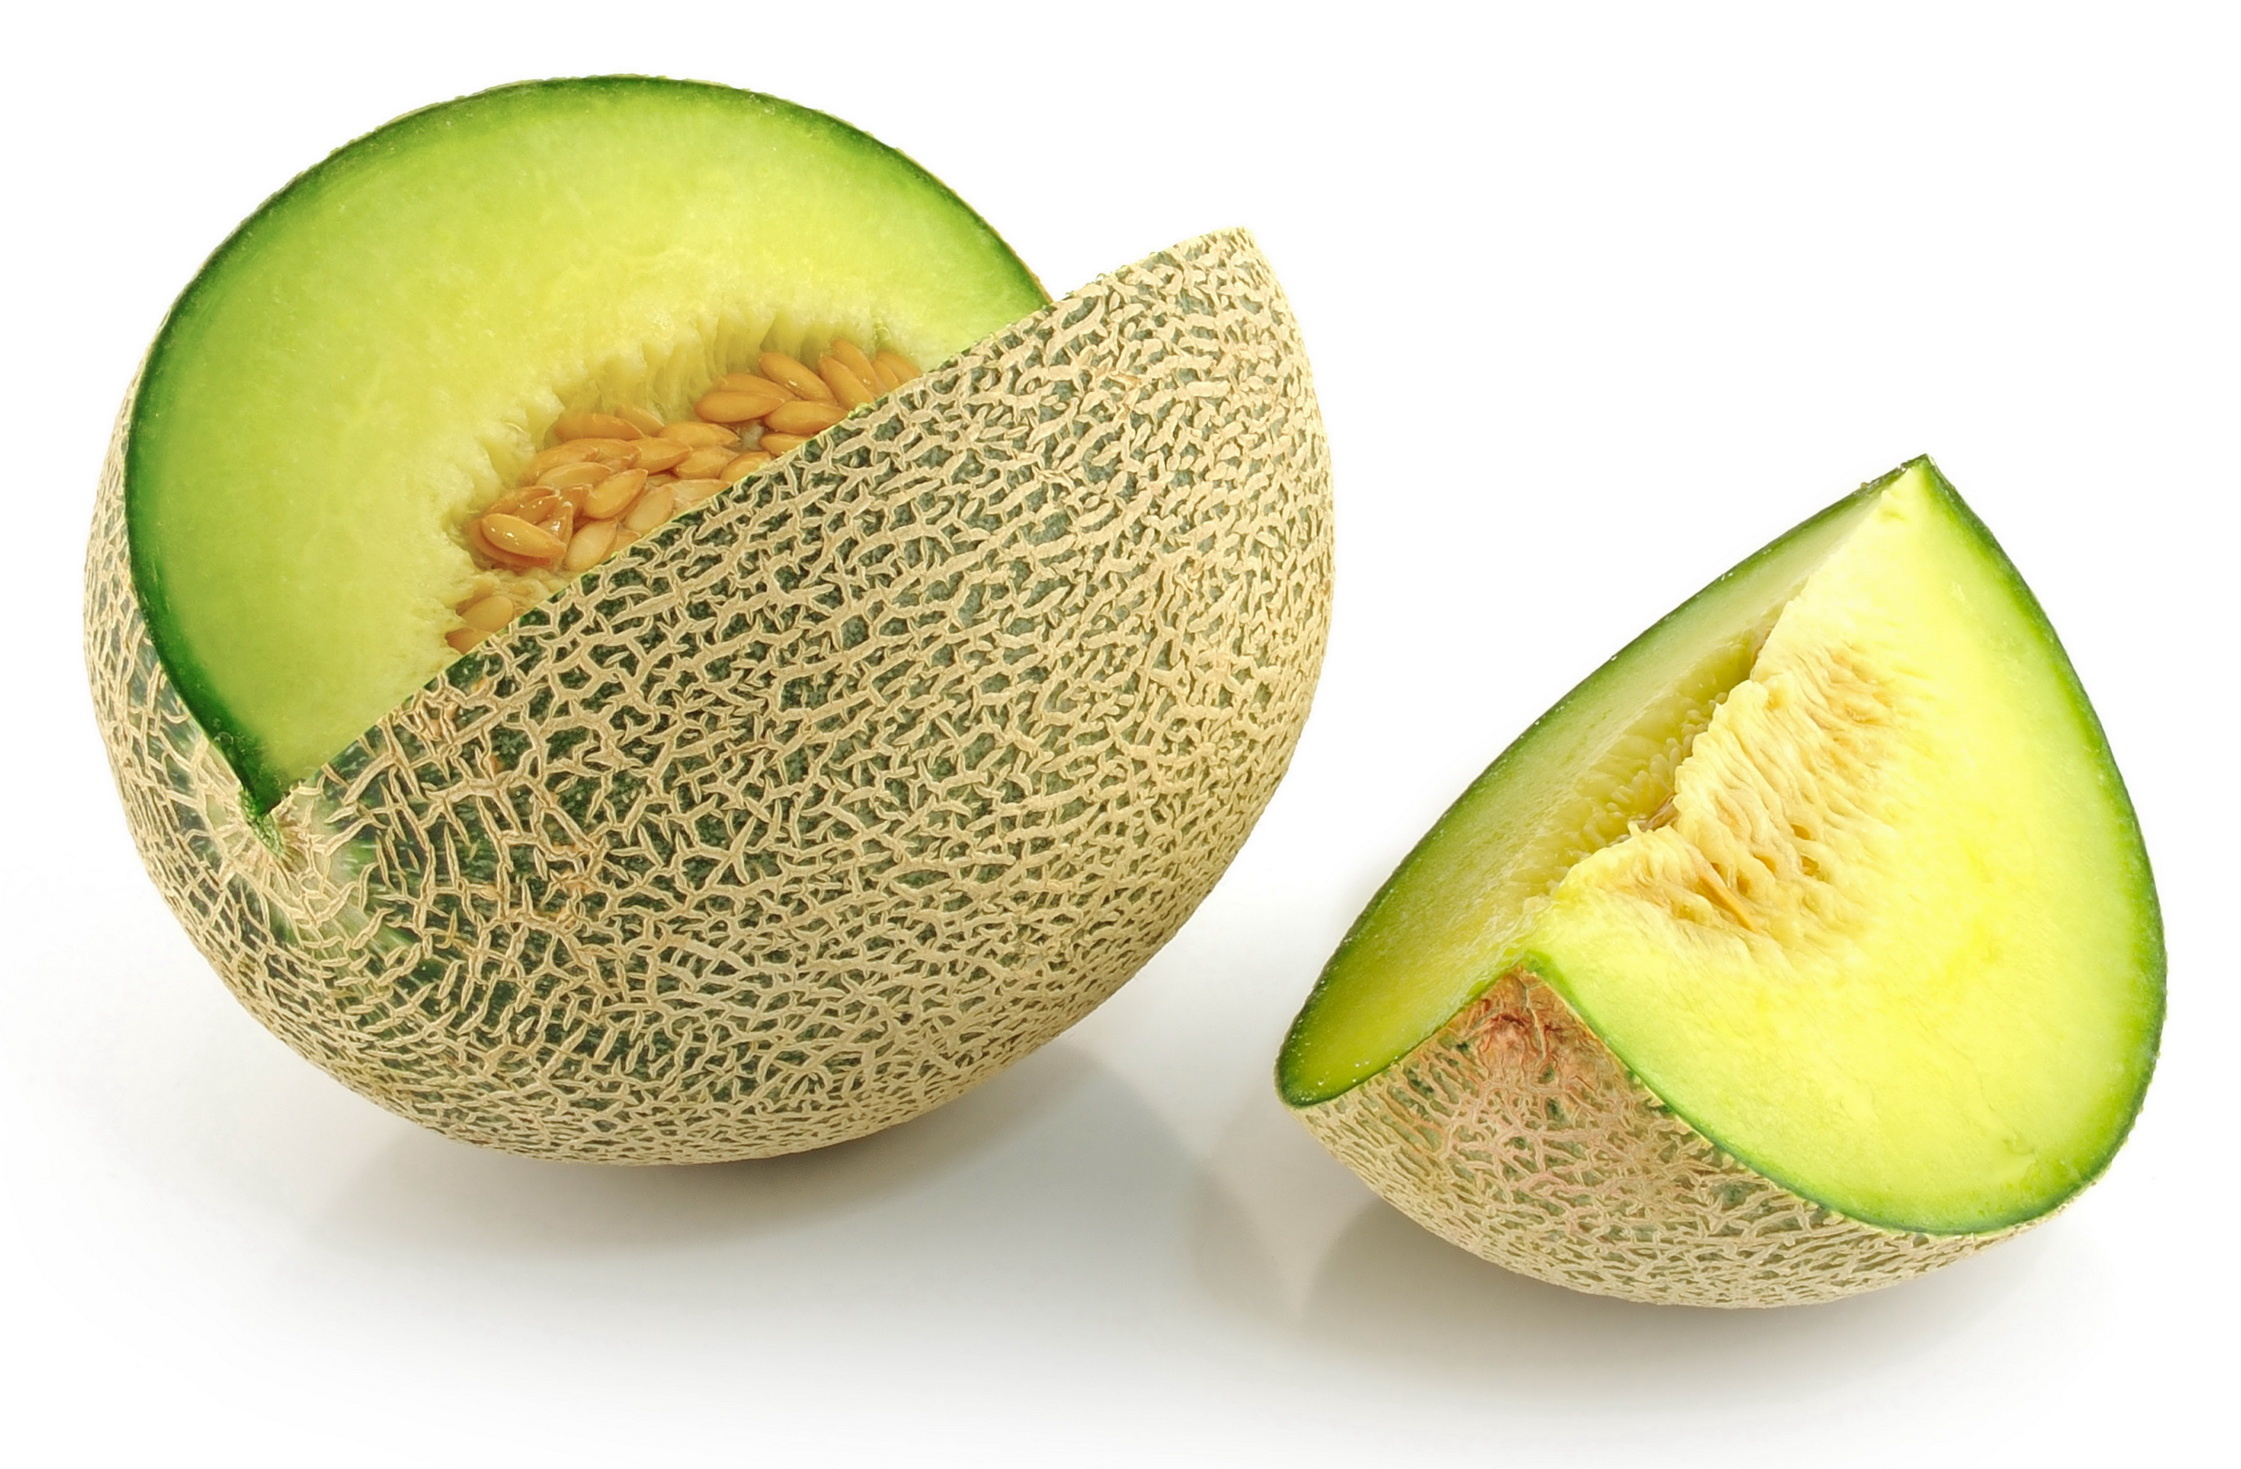 Melon: Rockmelons, Mostly eaten fresh due to its sweetness and juiciness. 2250x1470 HD Wallpaper.